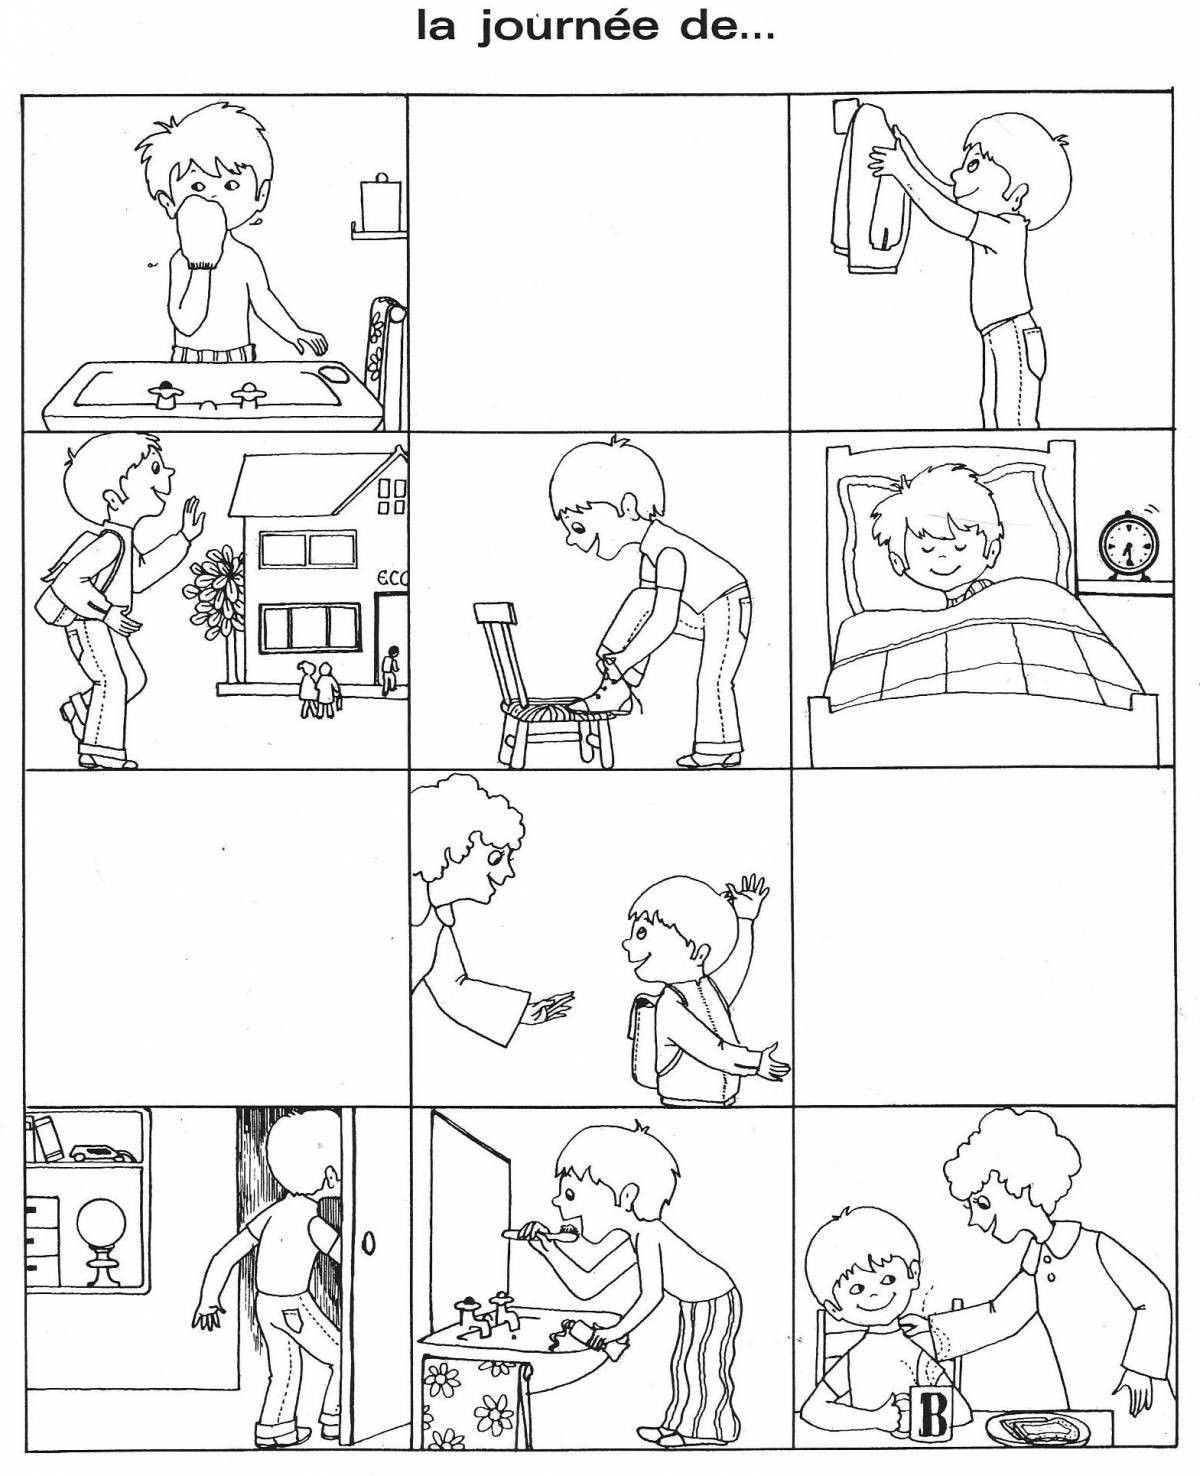 School Days Coloring Page